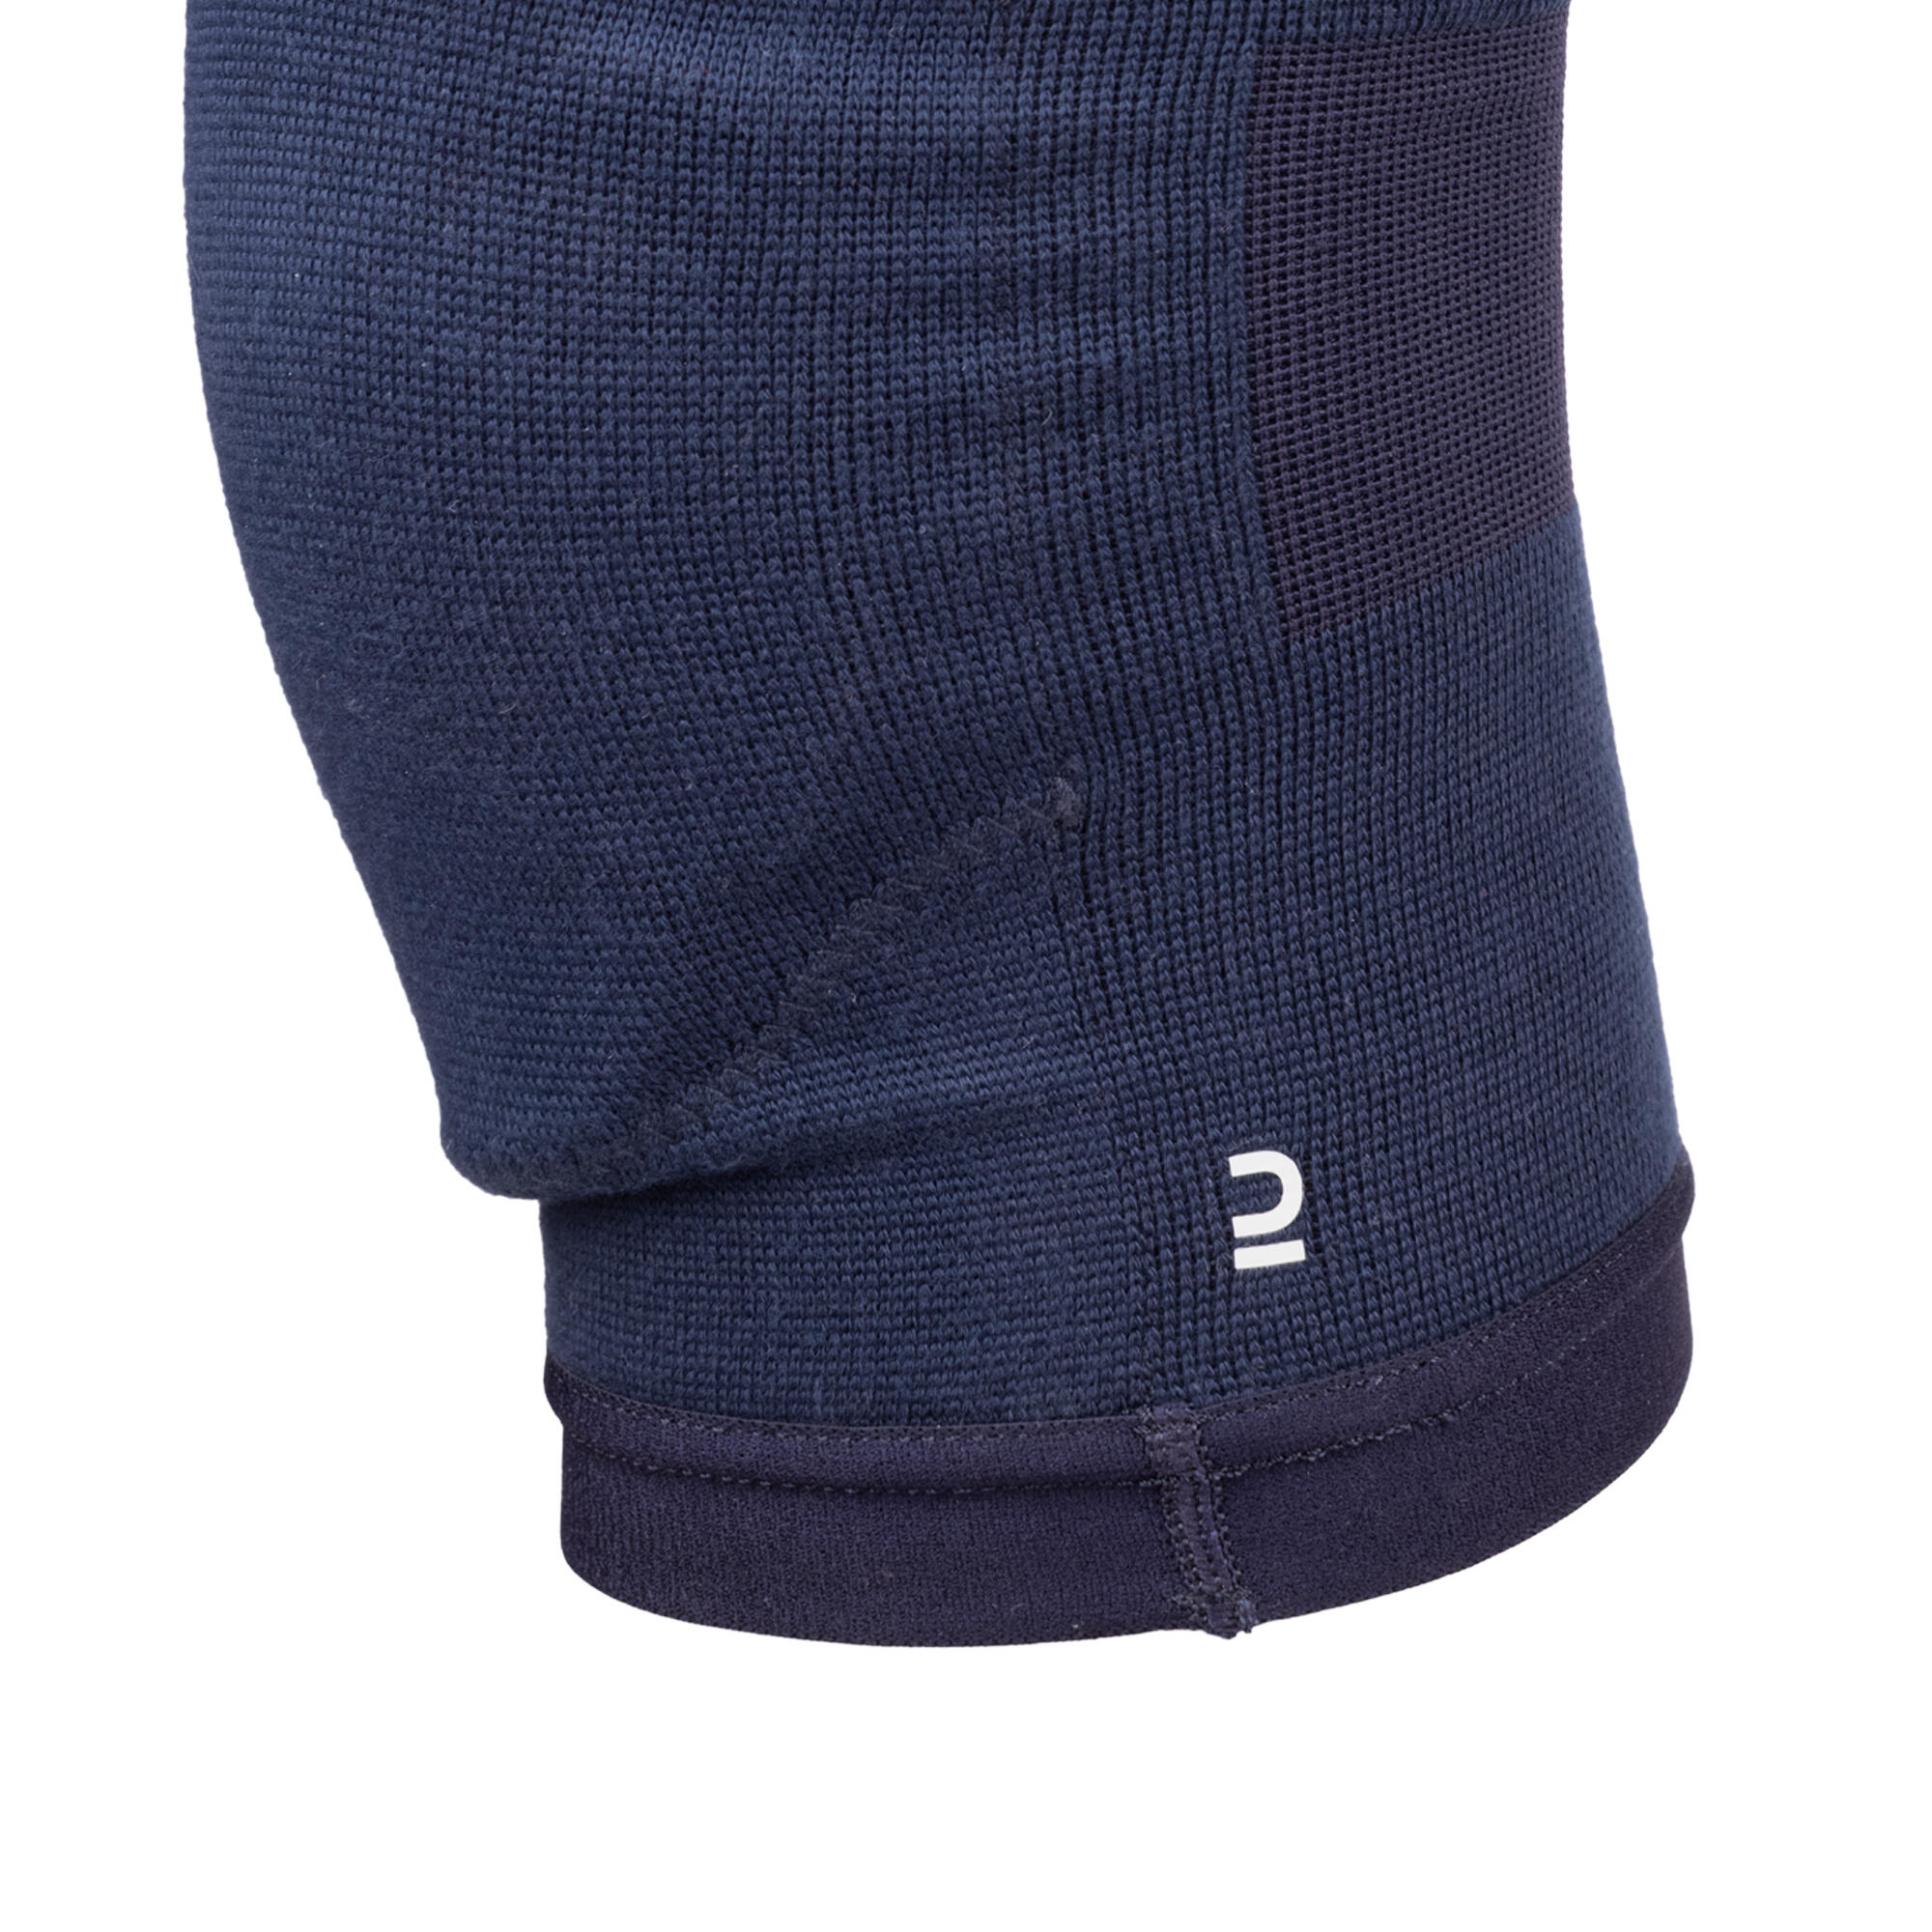 Volleyball Knee Pads VKP500 - Navy 5/5